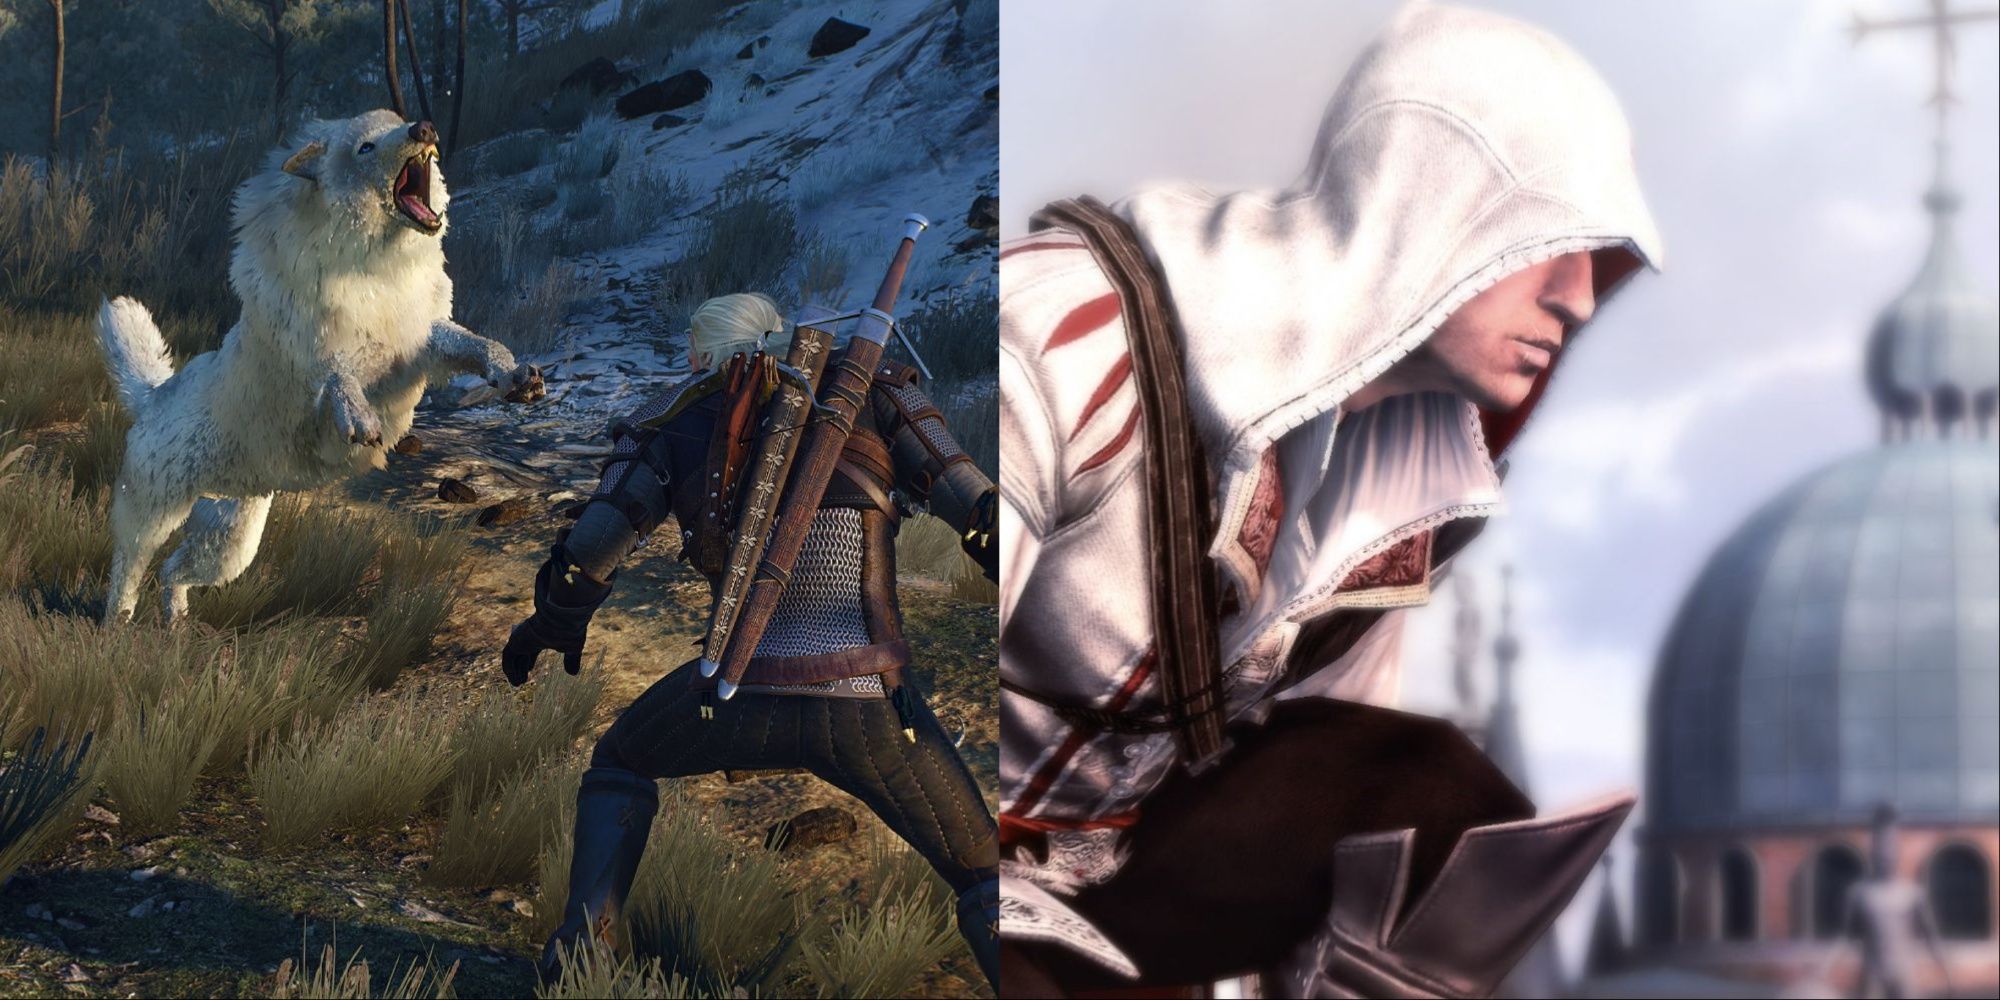 Best Game Sequels Featured Split Image The Witcher 3 and Assassin's Creed 2